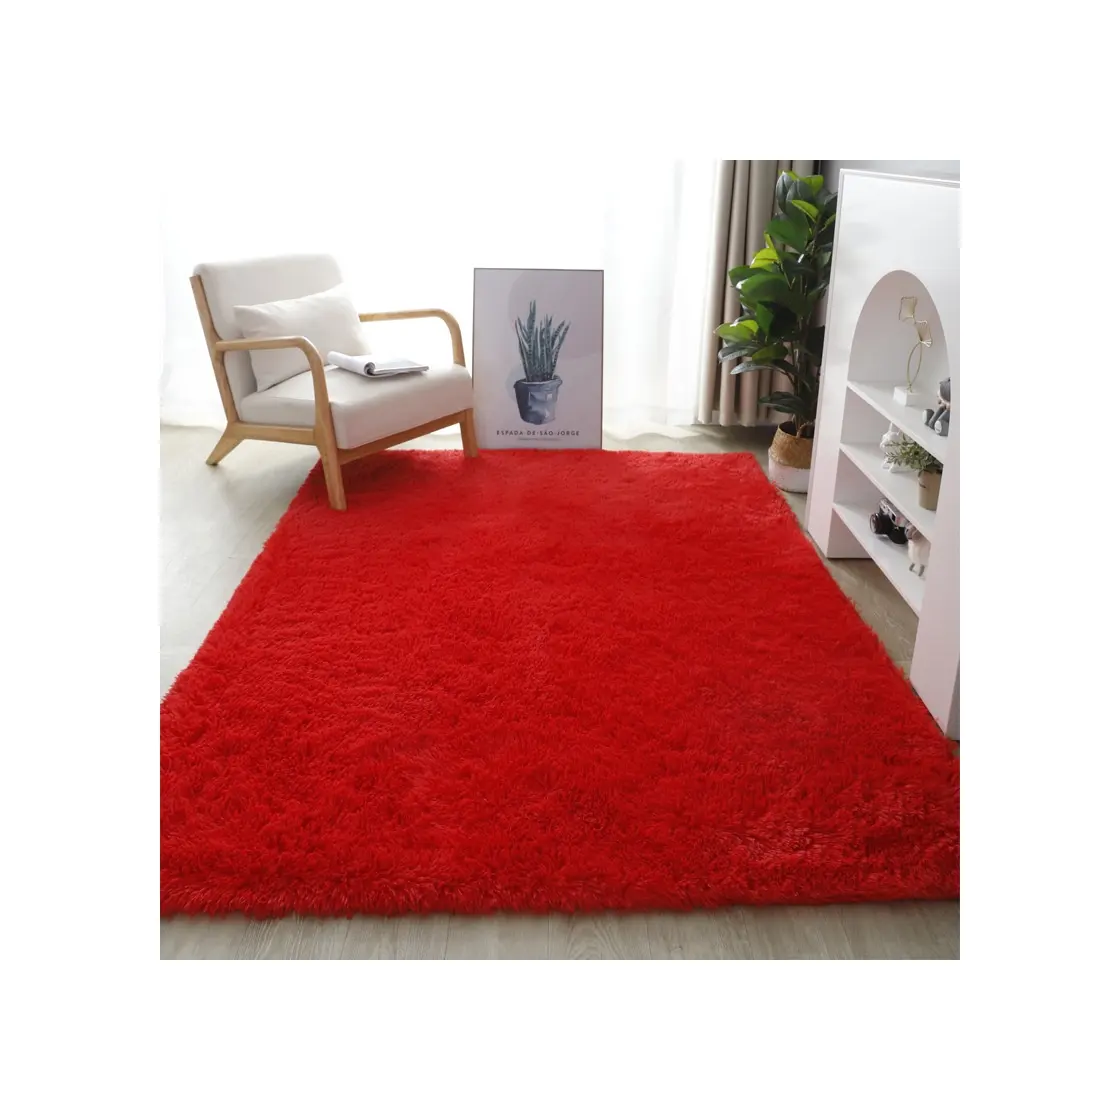 Hot selling Colourful Soft Indoor Area Rugs Fluffy Living Room pure color plush carpet fluffy faux fur rugs